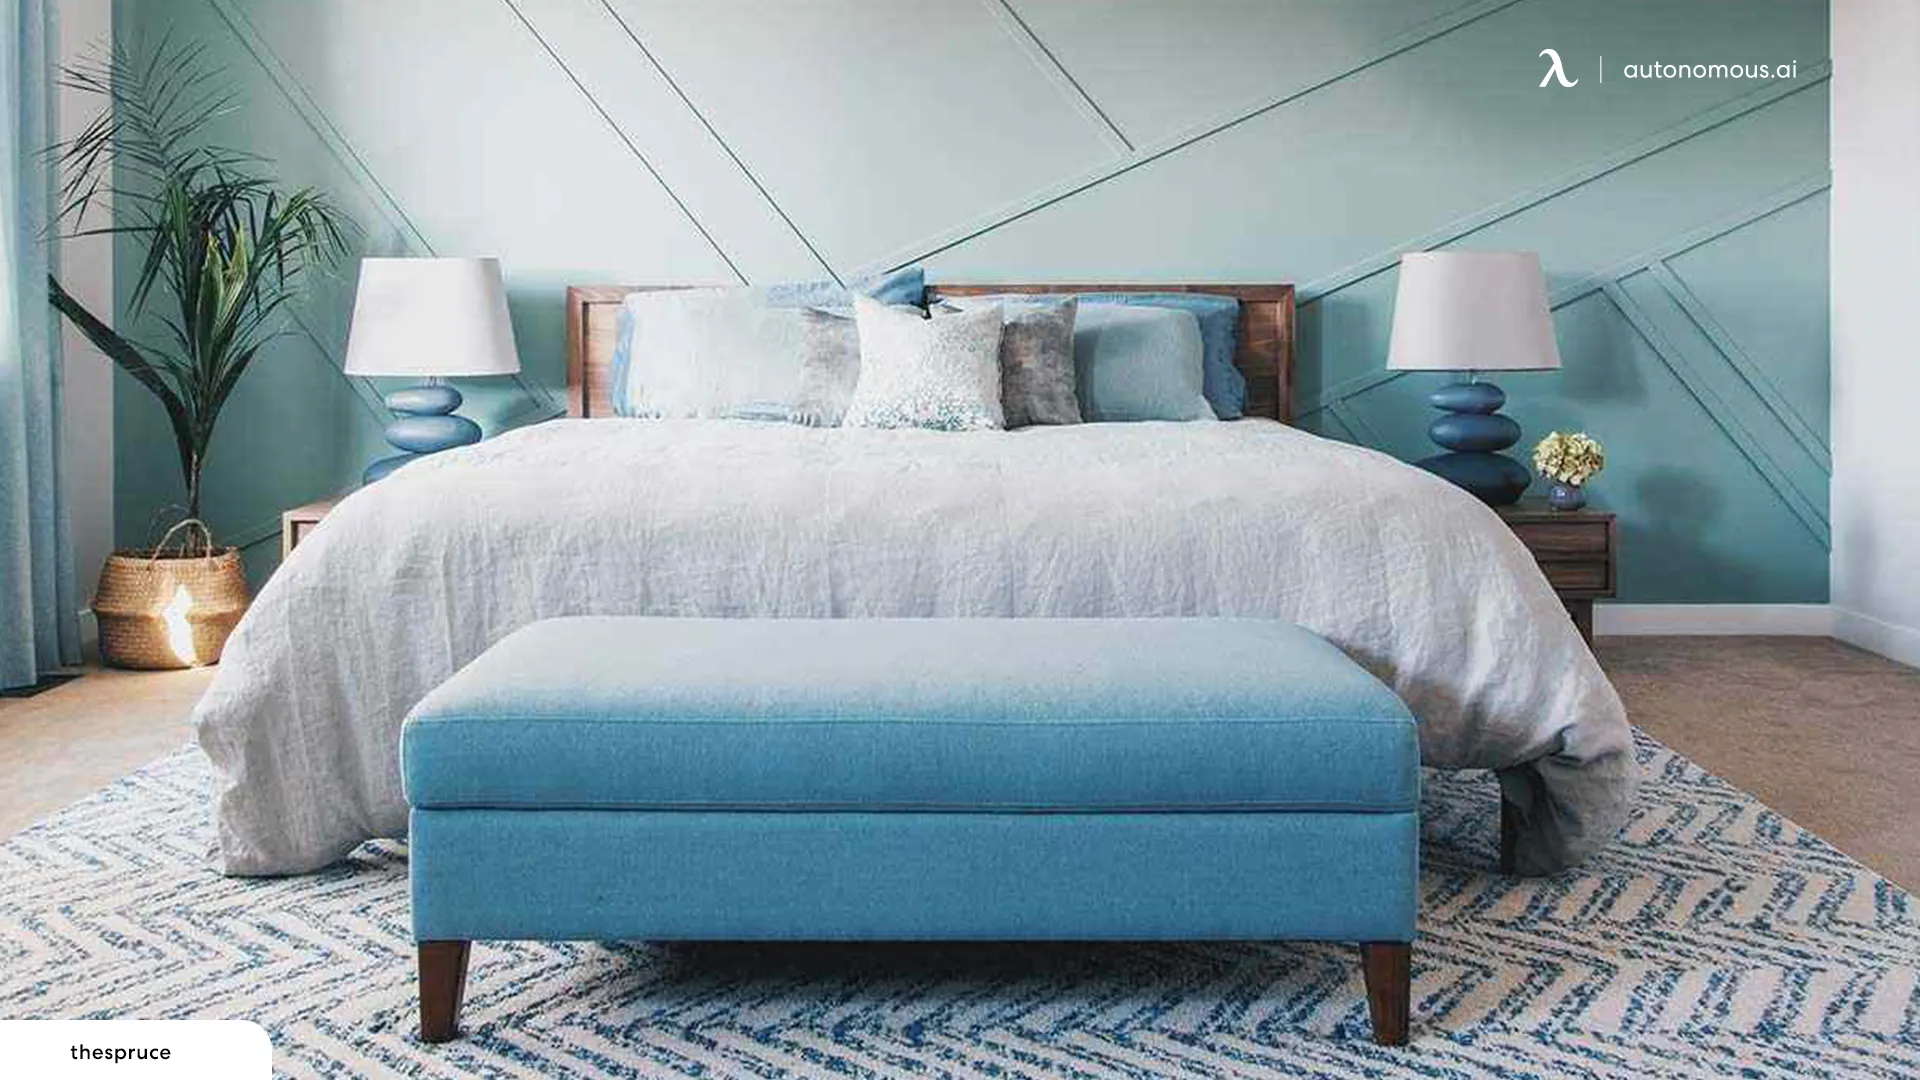 Hotel-Style Bedding - Airbnb decorating ideas